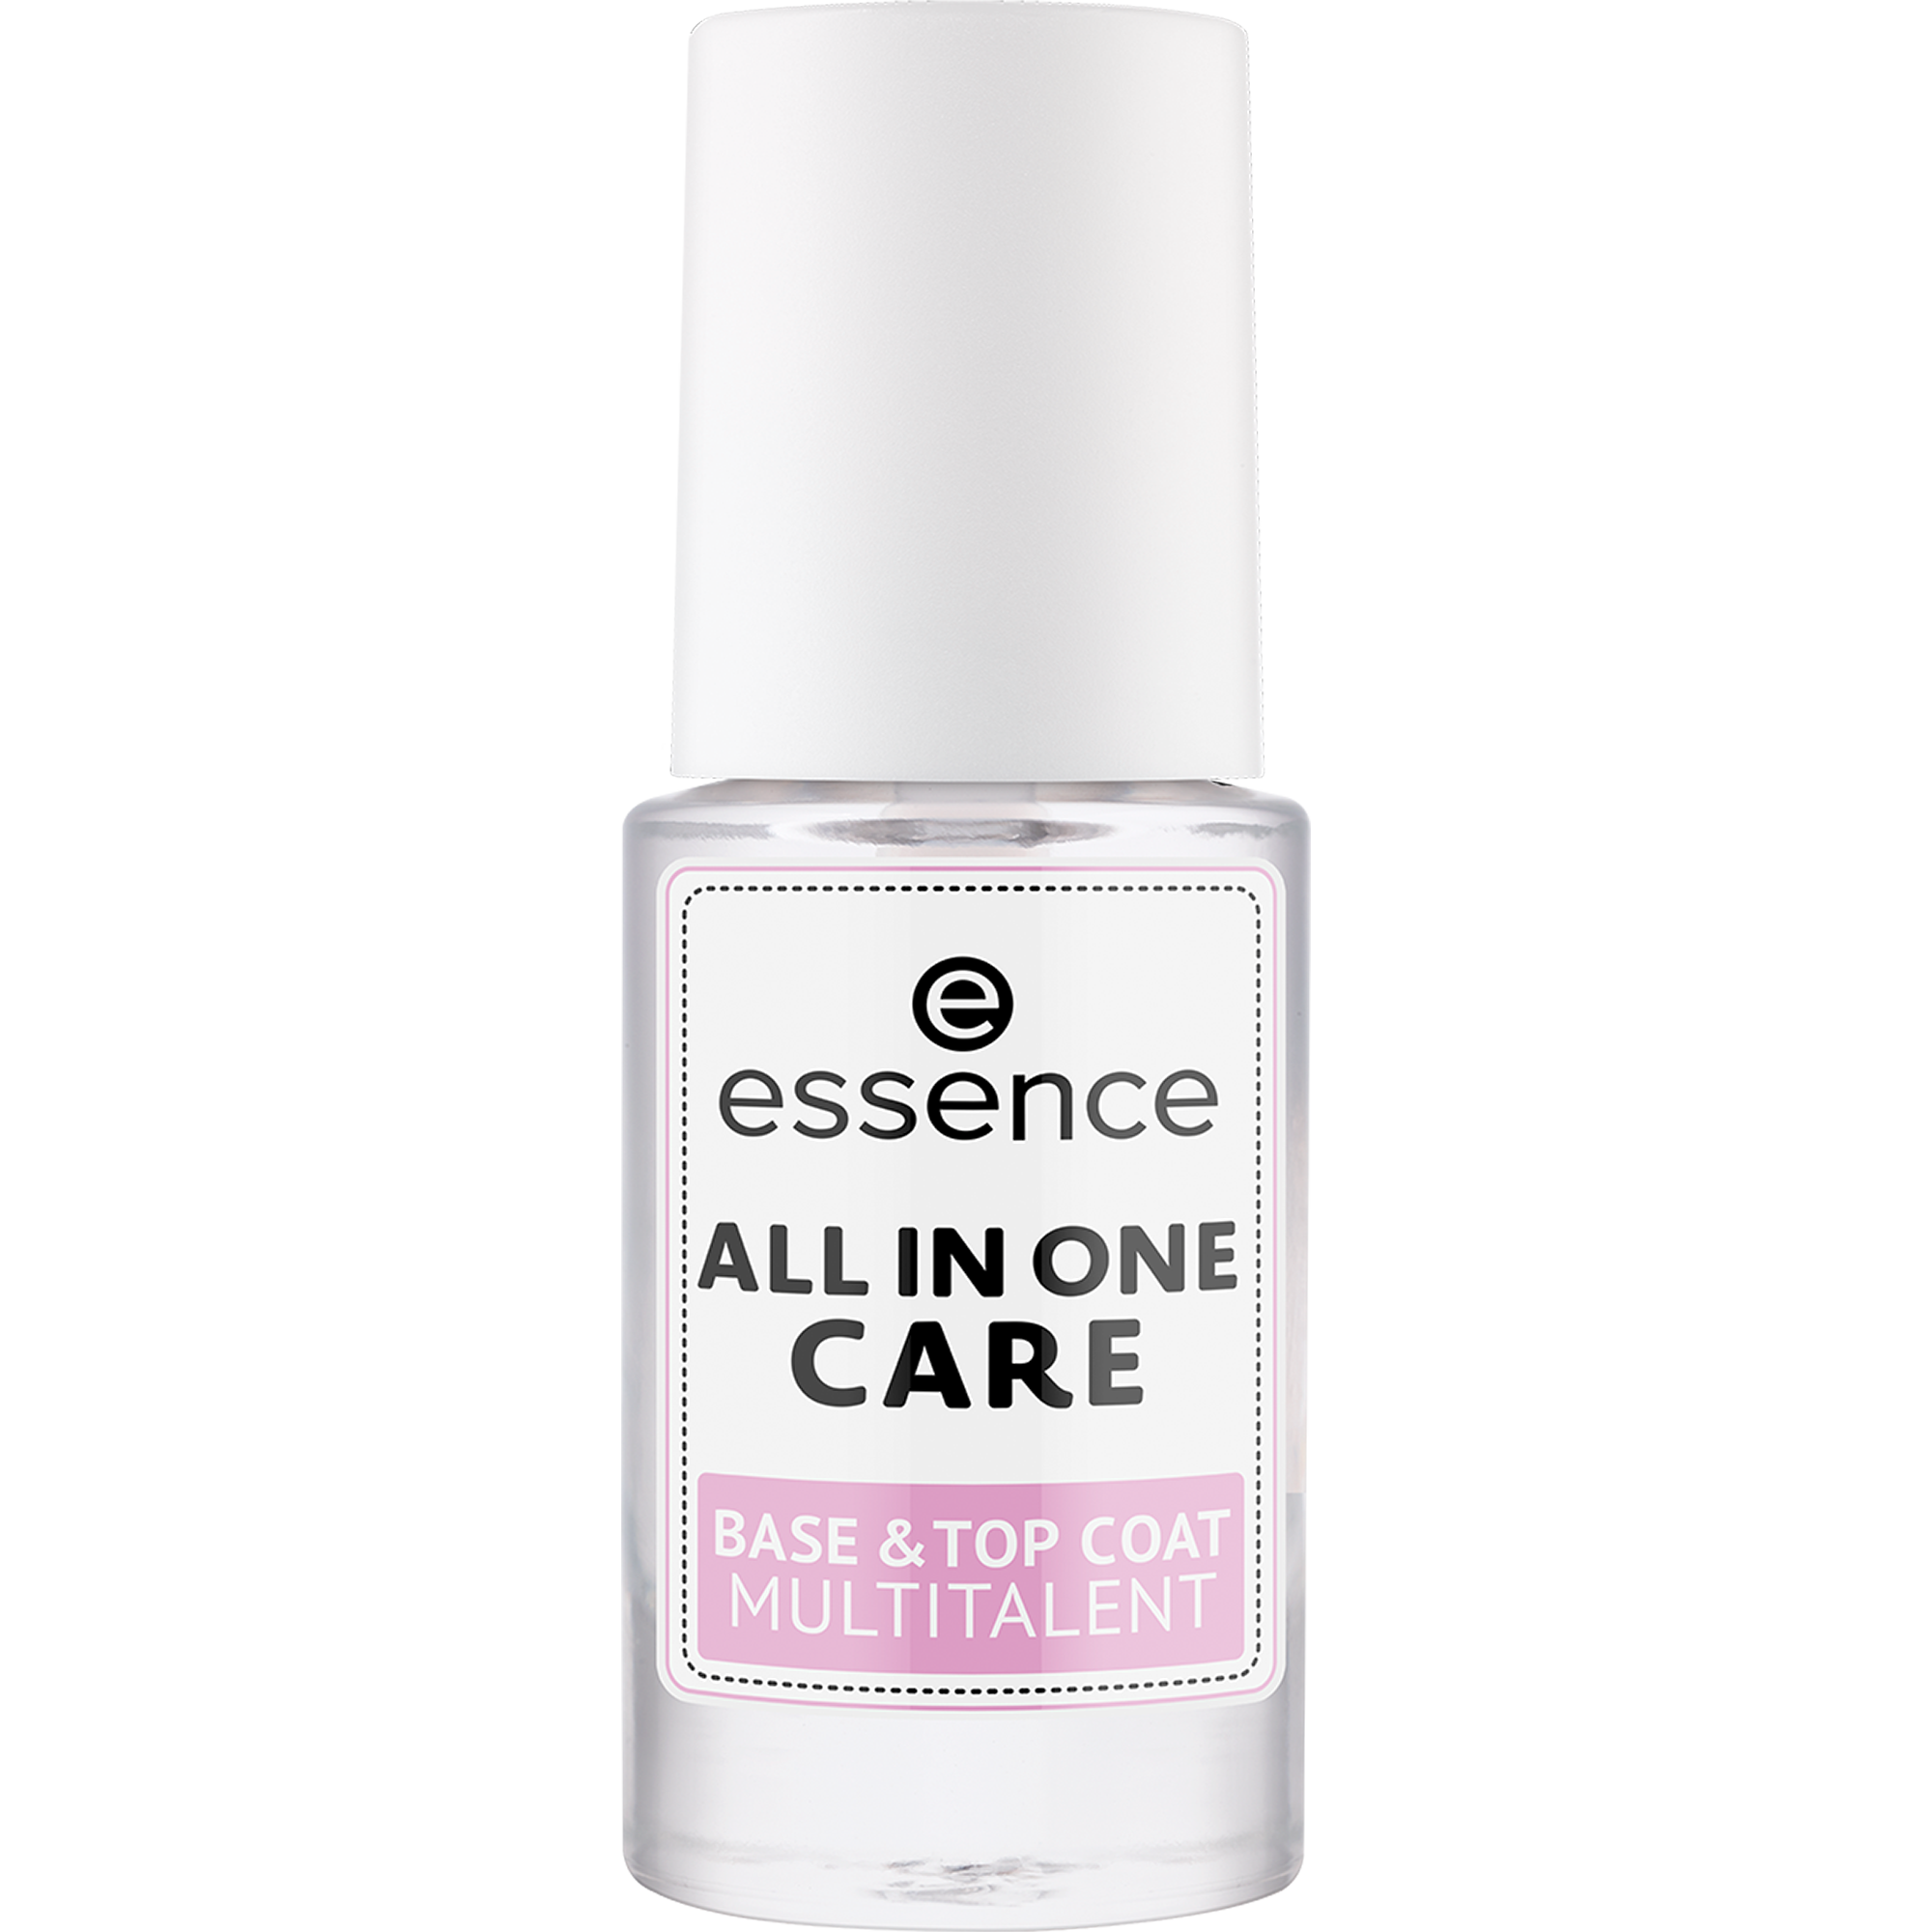 ALL IN ONE CARE BASE & TOP COAT MULTITALENT